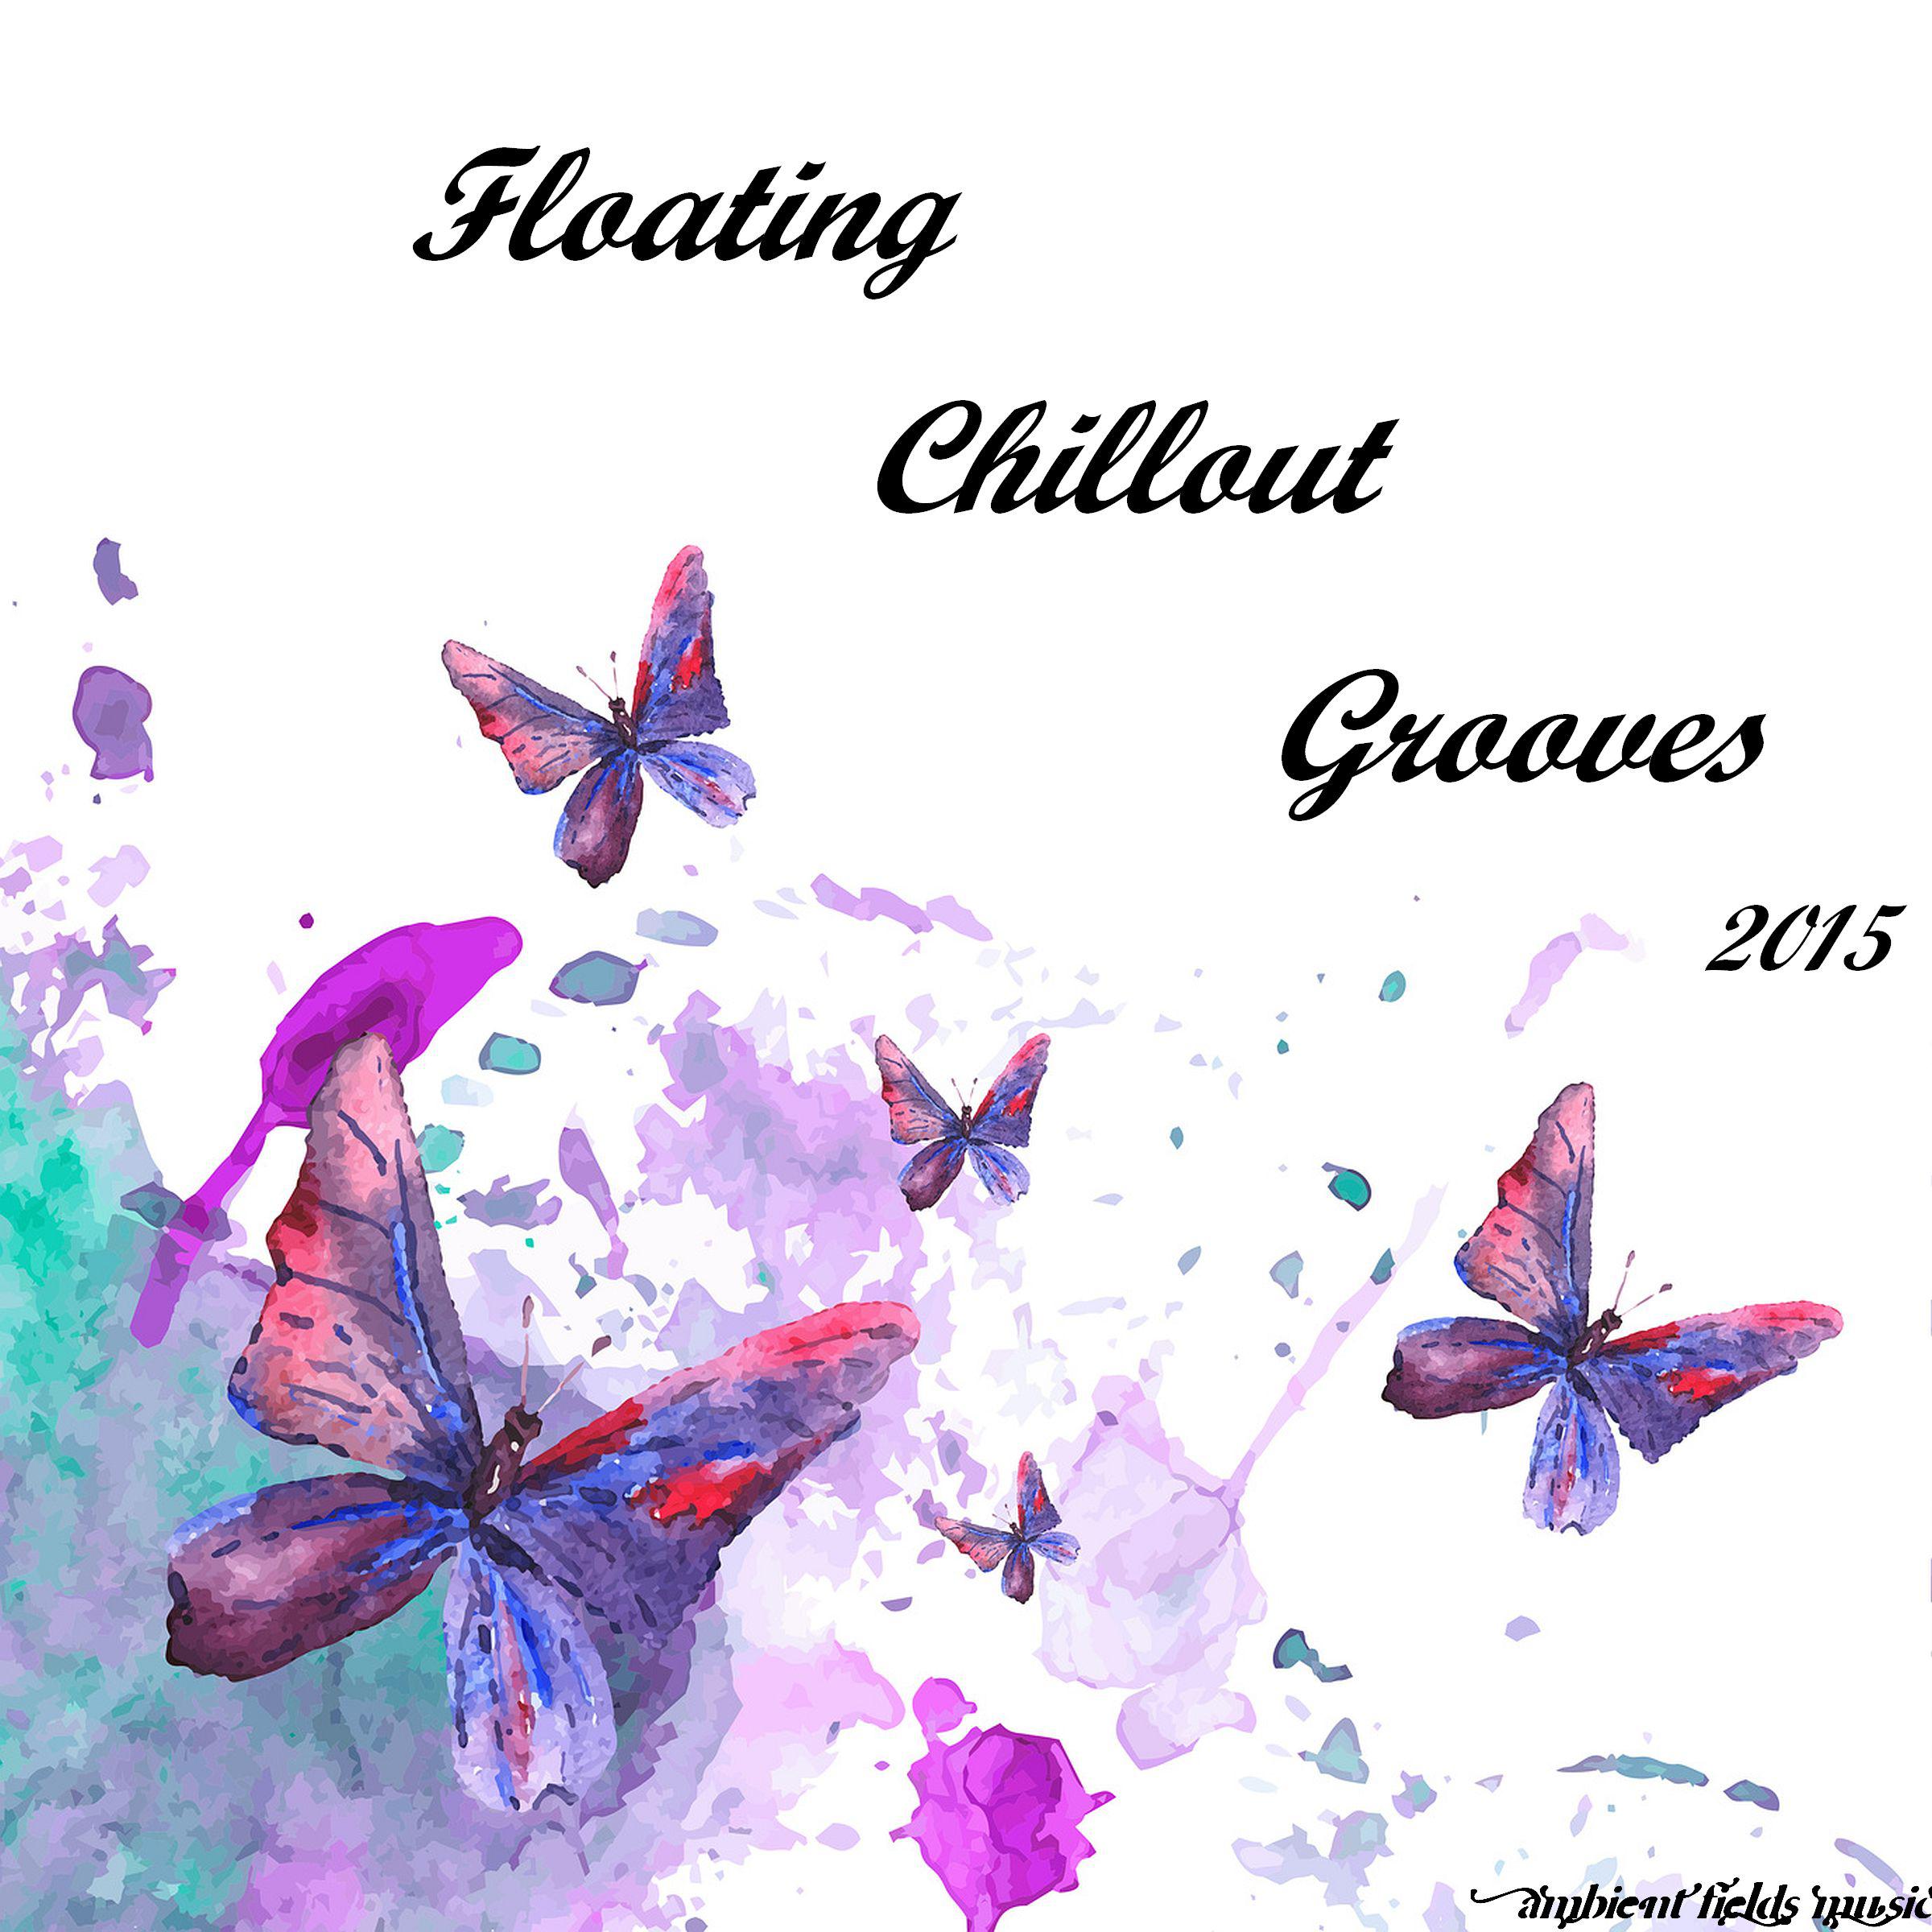 Floating Chillout Grooves 2015